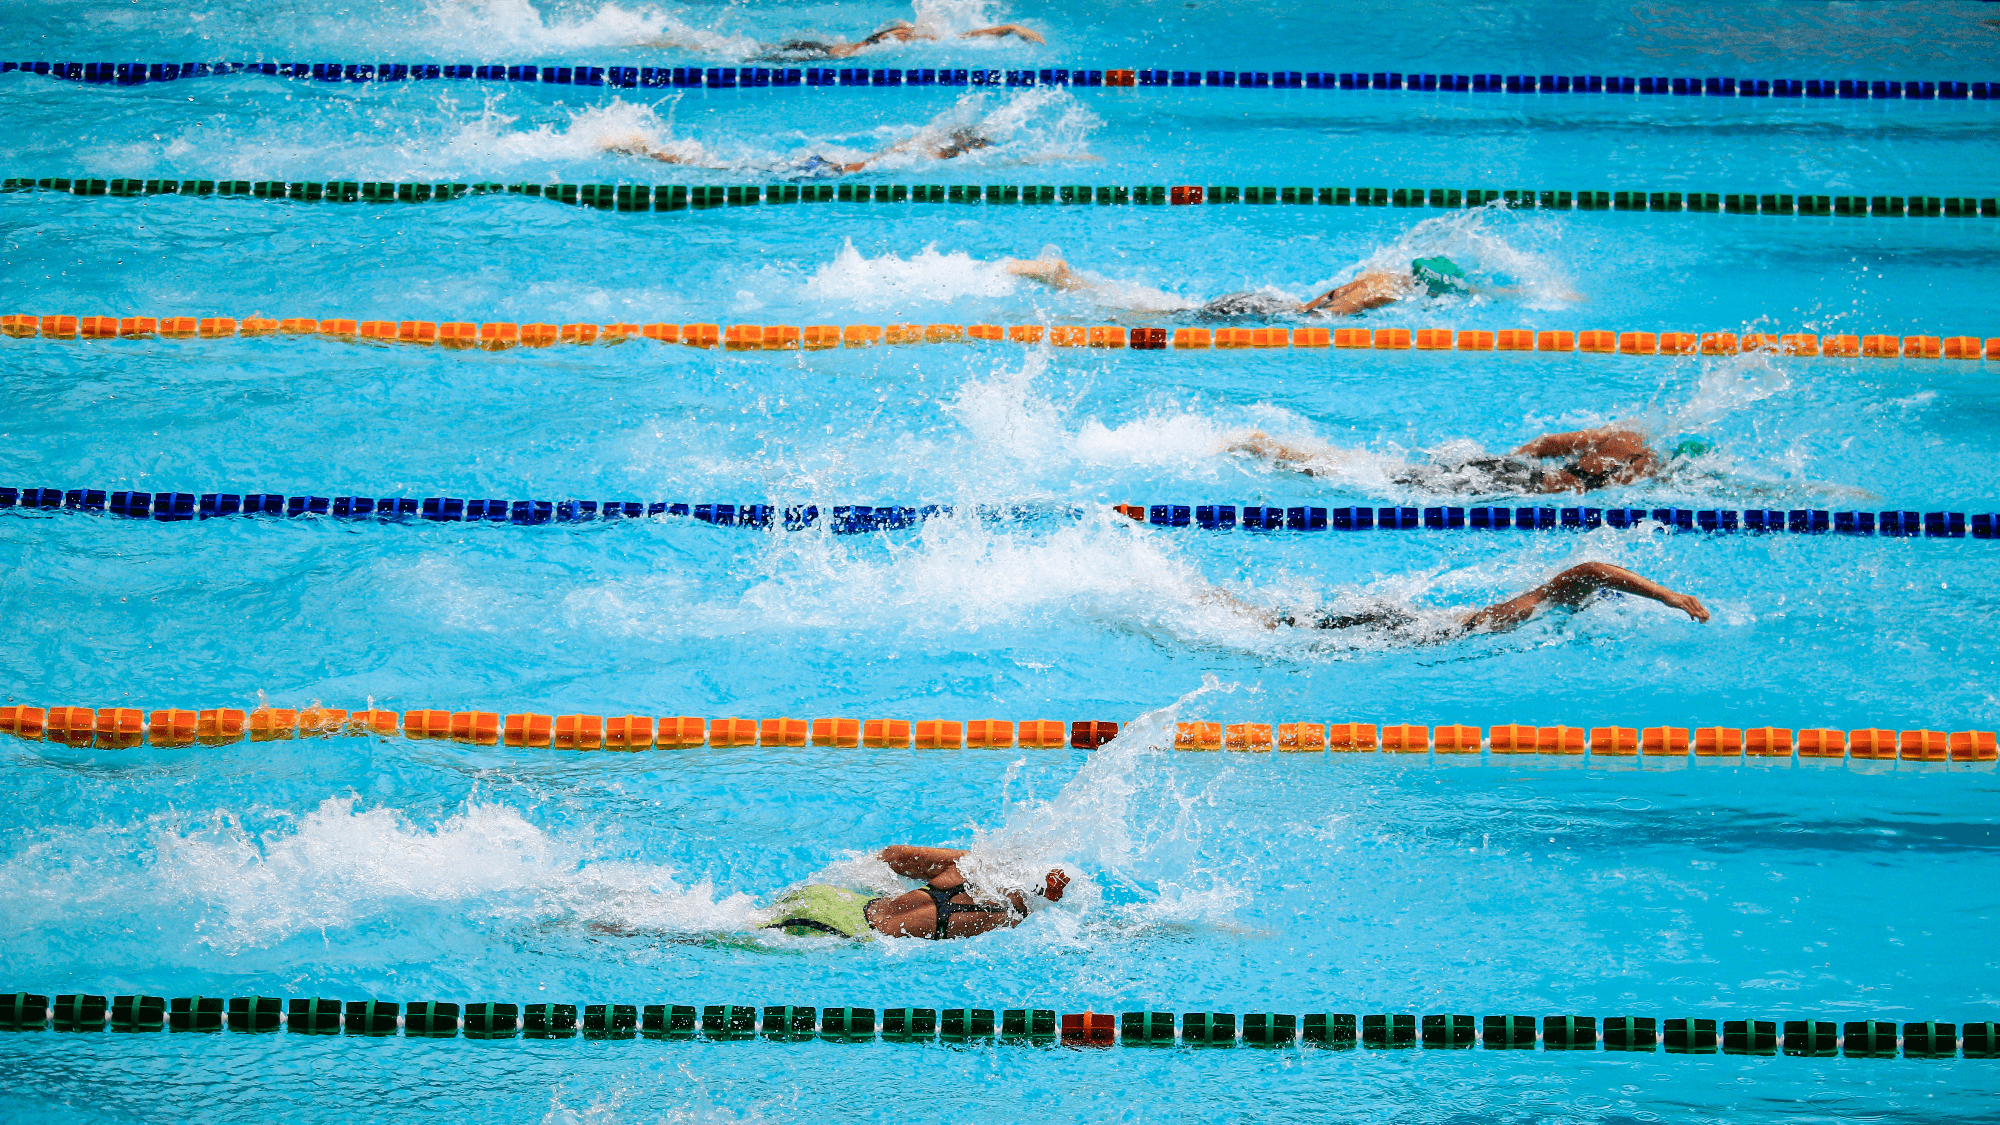 gut-muscle connection / a photo of swimmers swimming laps in the pool